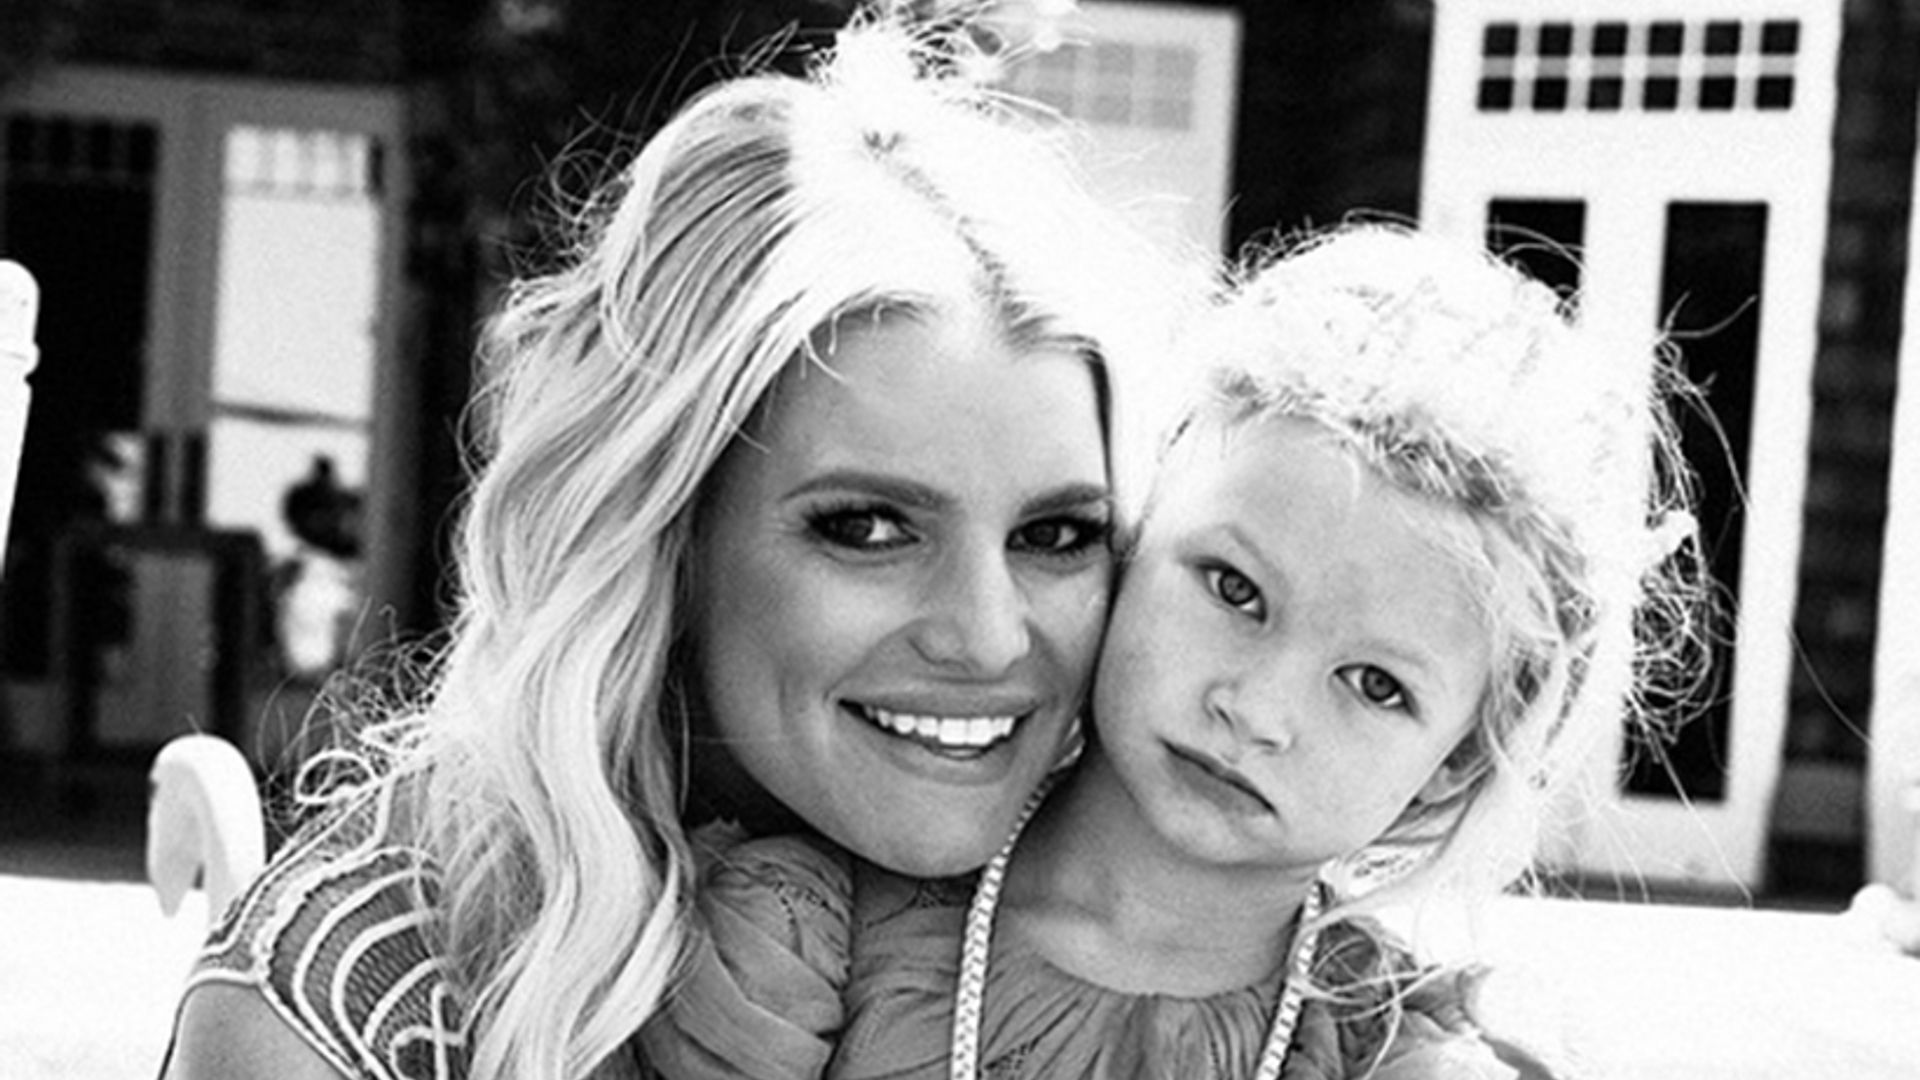 Jessica Simpson and her five-year-old daughter wear matching floral dresses  on Instagram